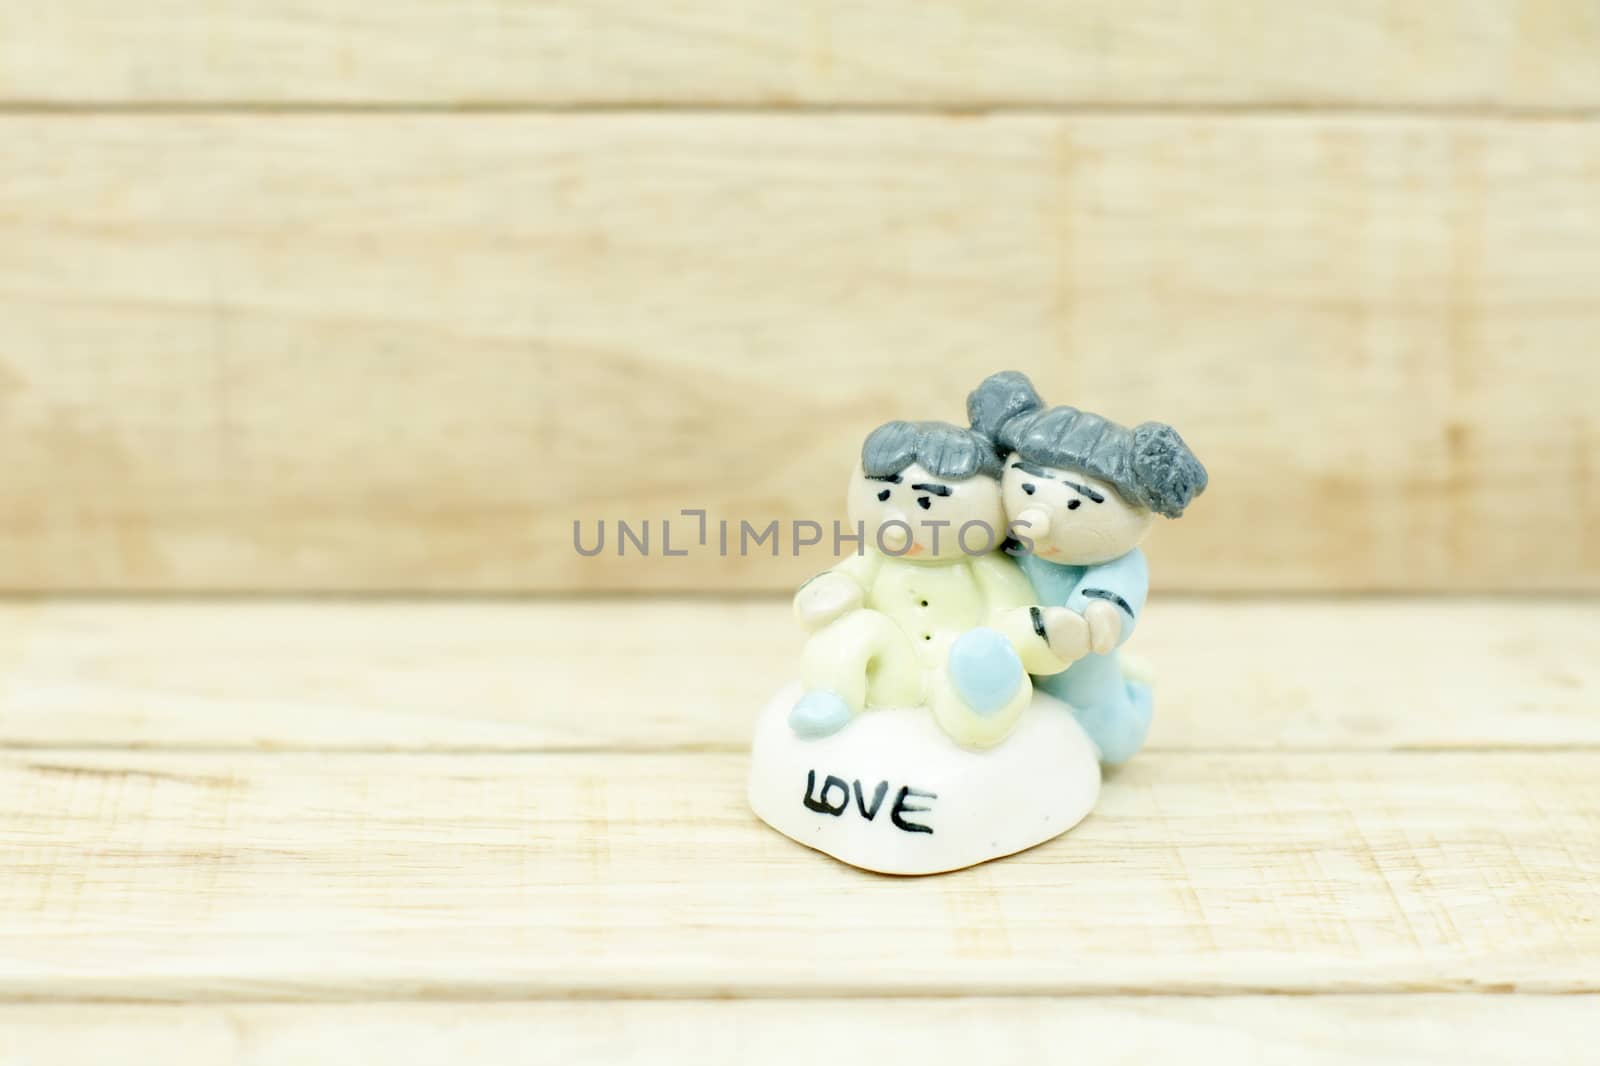 Little boy and girl ceramic dolls on wood pattern background